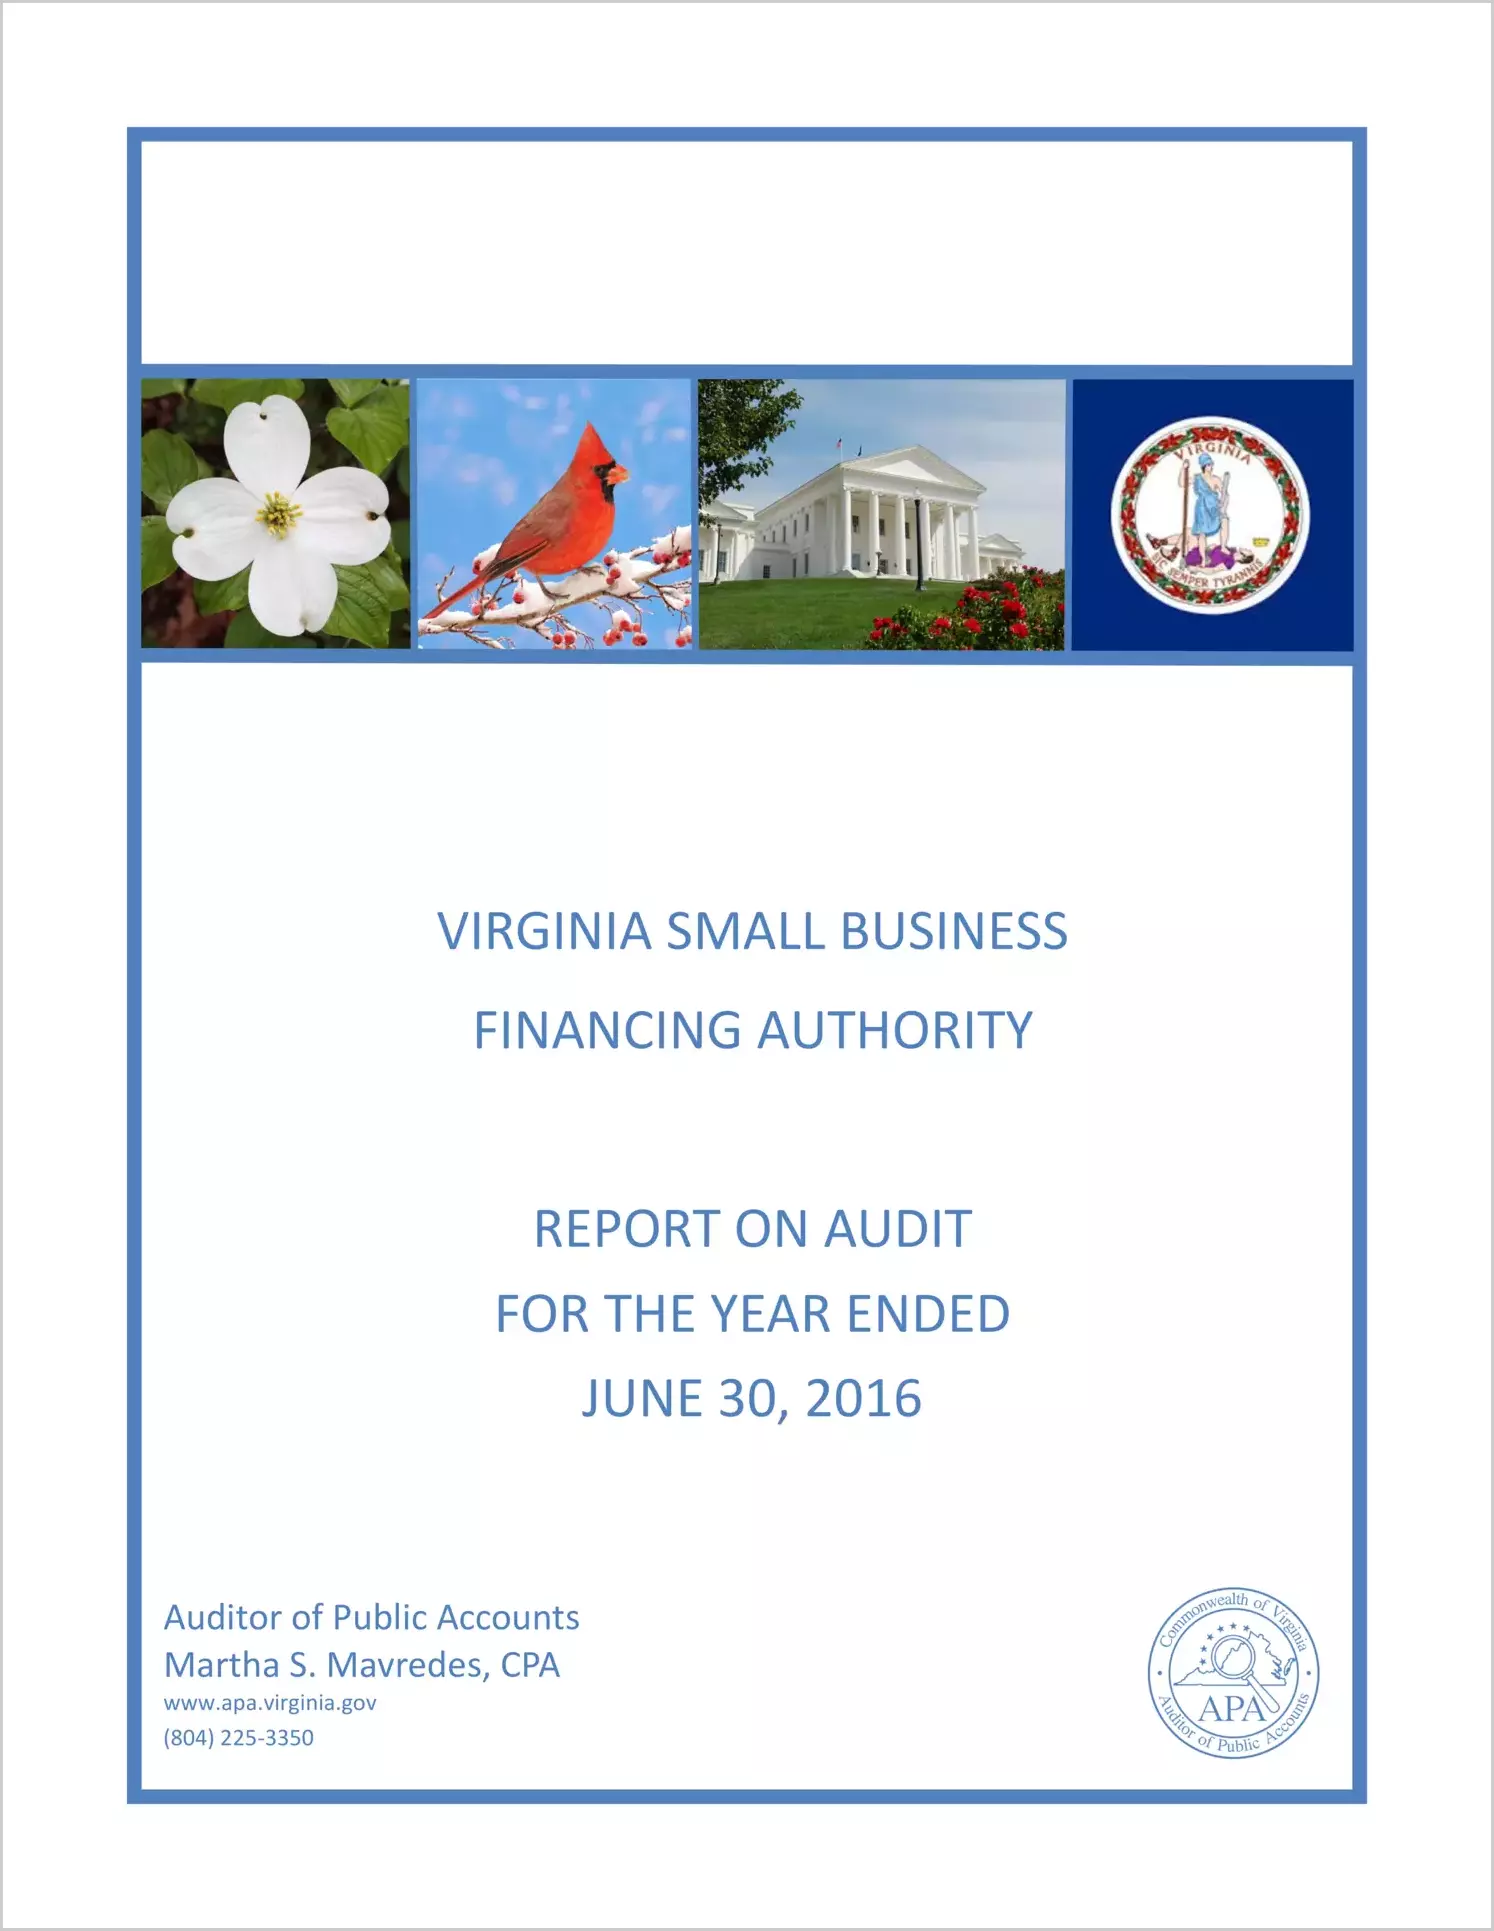 Virginia Small Business Financing Authority for the year ended June 30, 2016